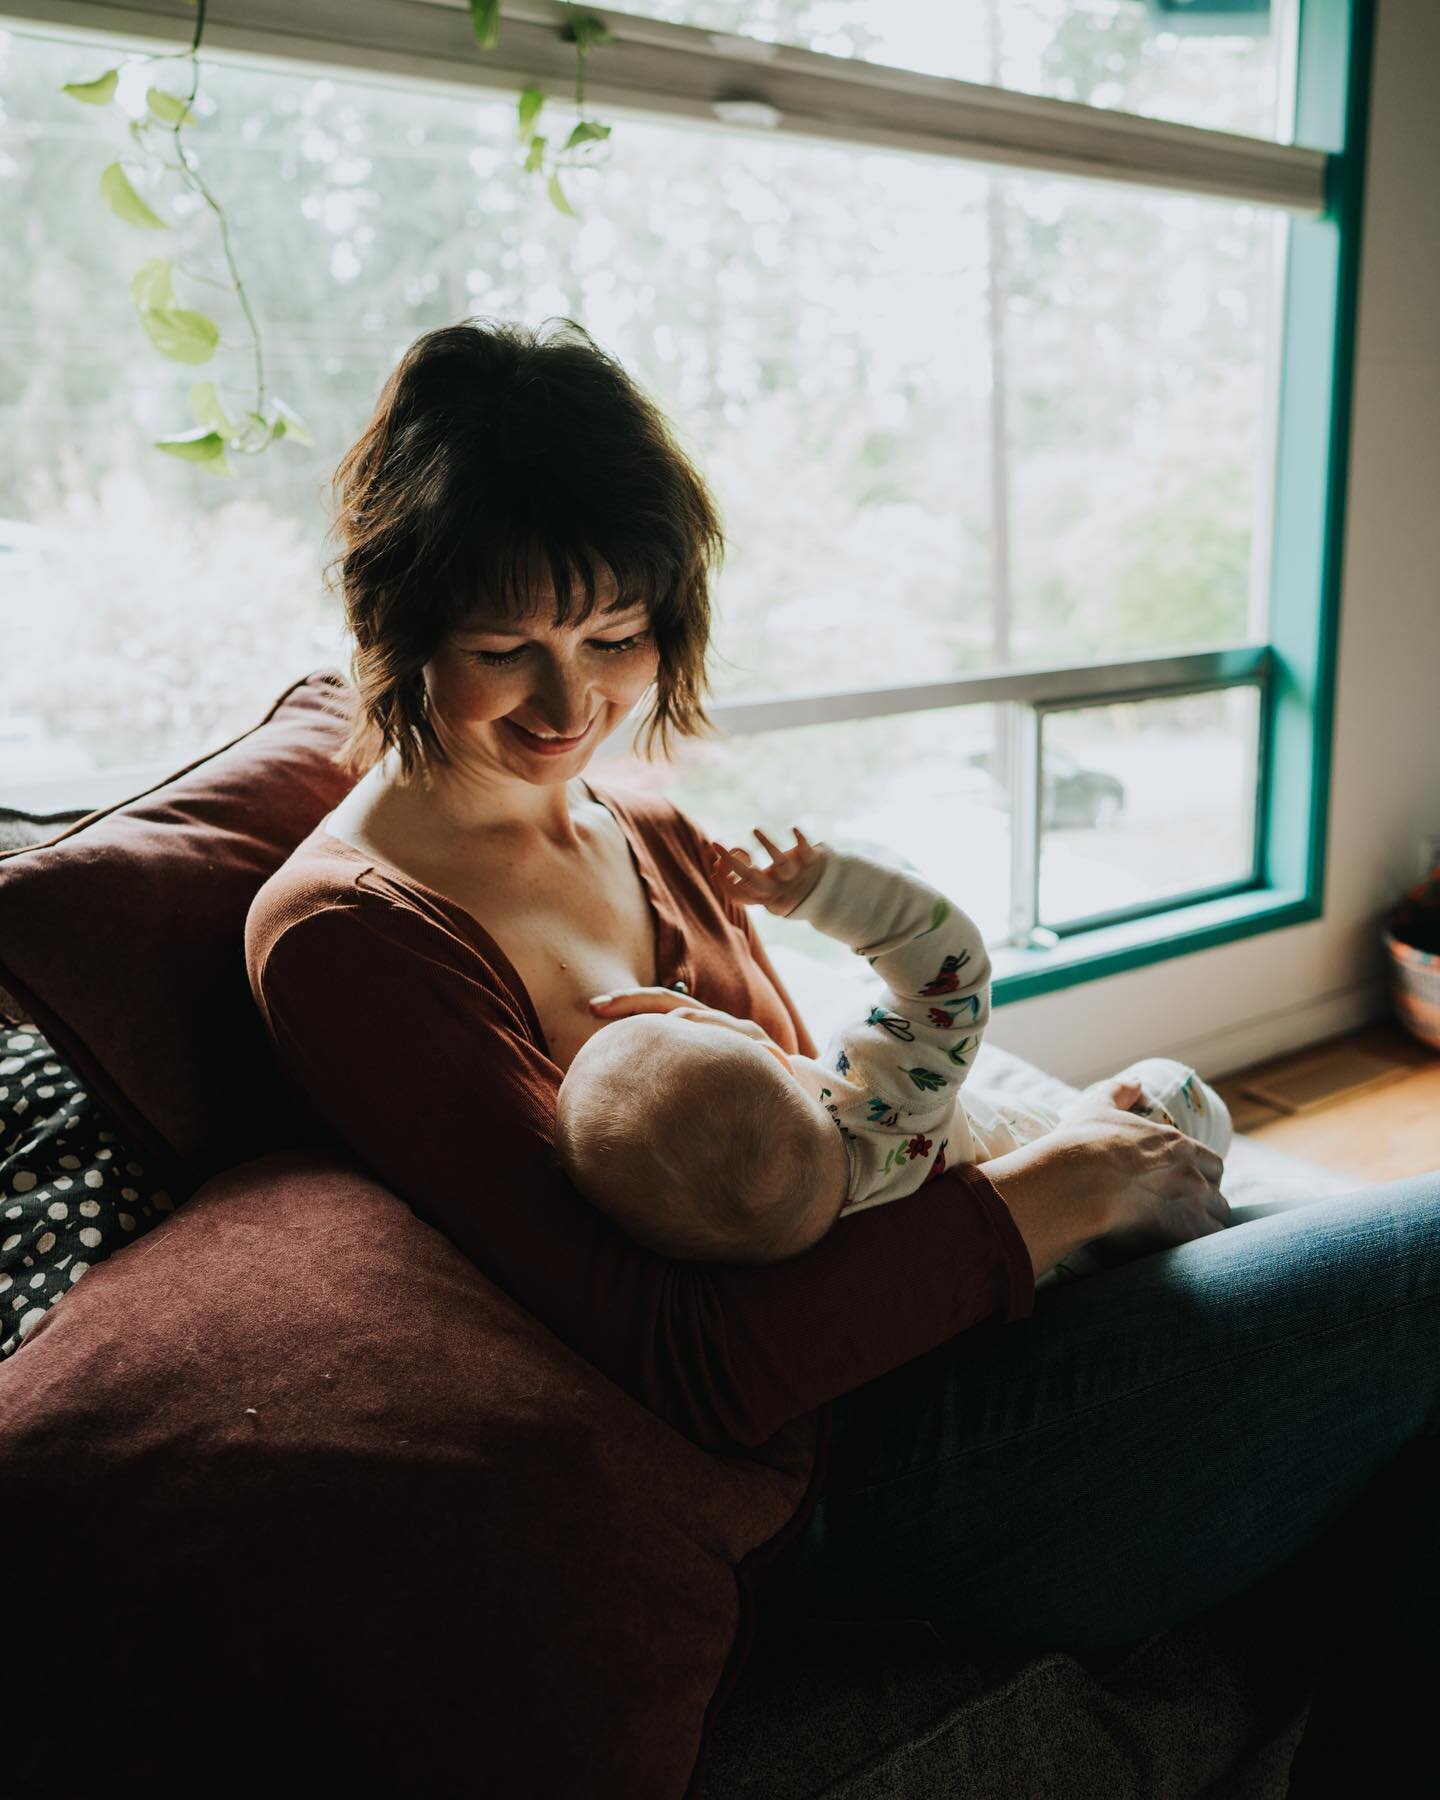 Nursing and feeding your babies is one of the most beautiful things to witness. The tiny hands reaching for you, the eye contact and connection&hellip; give me heart eyes every time. Feeding your baby takes hours each day and you repeat this process 